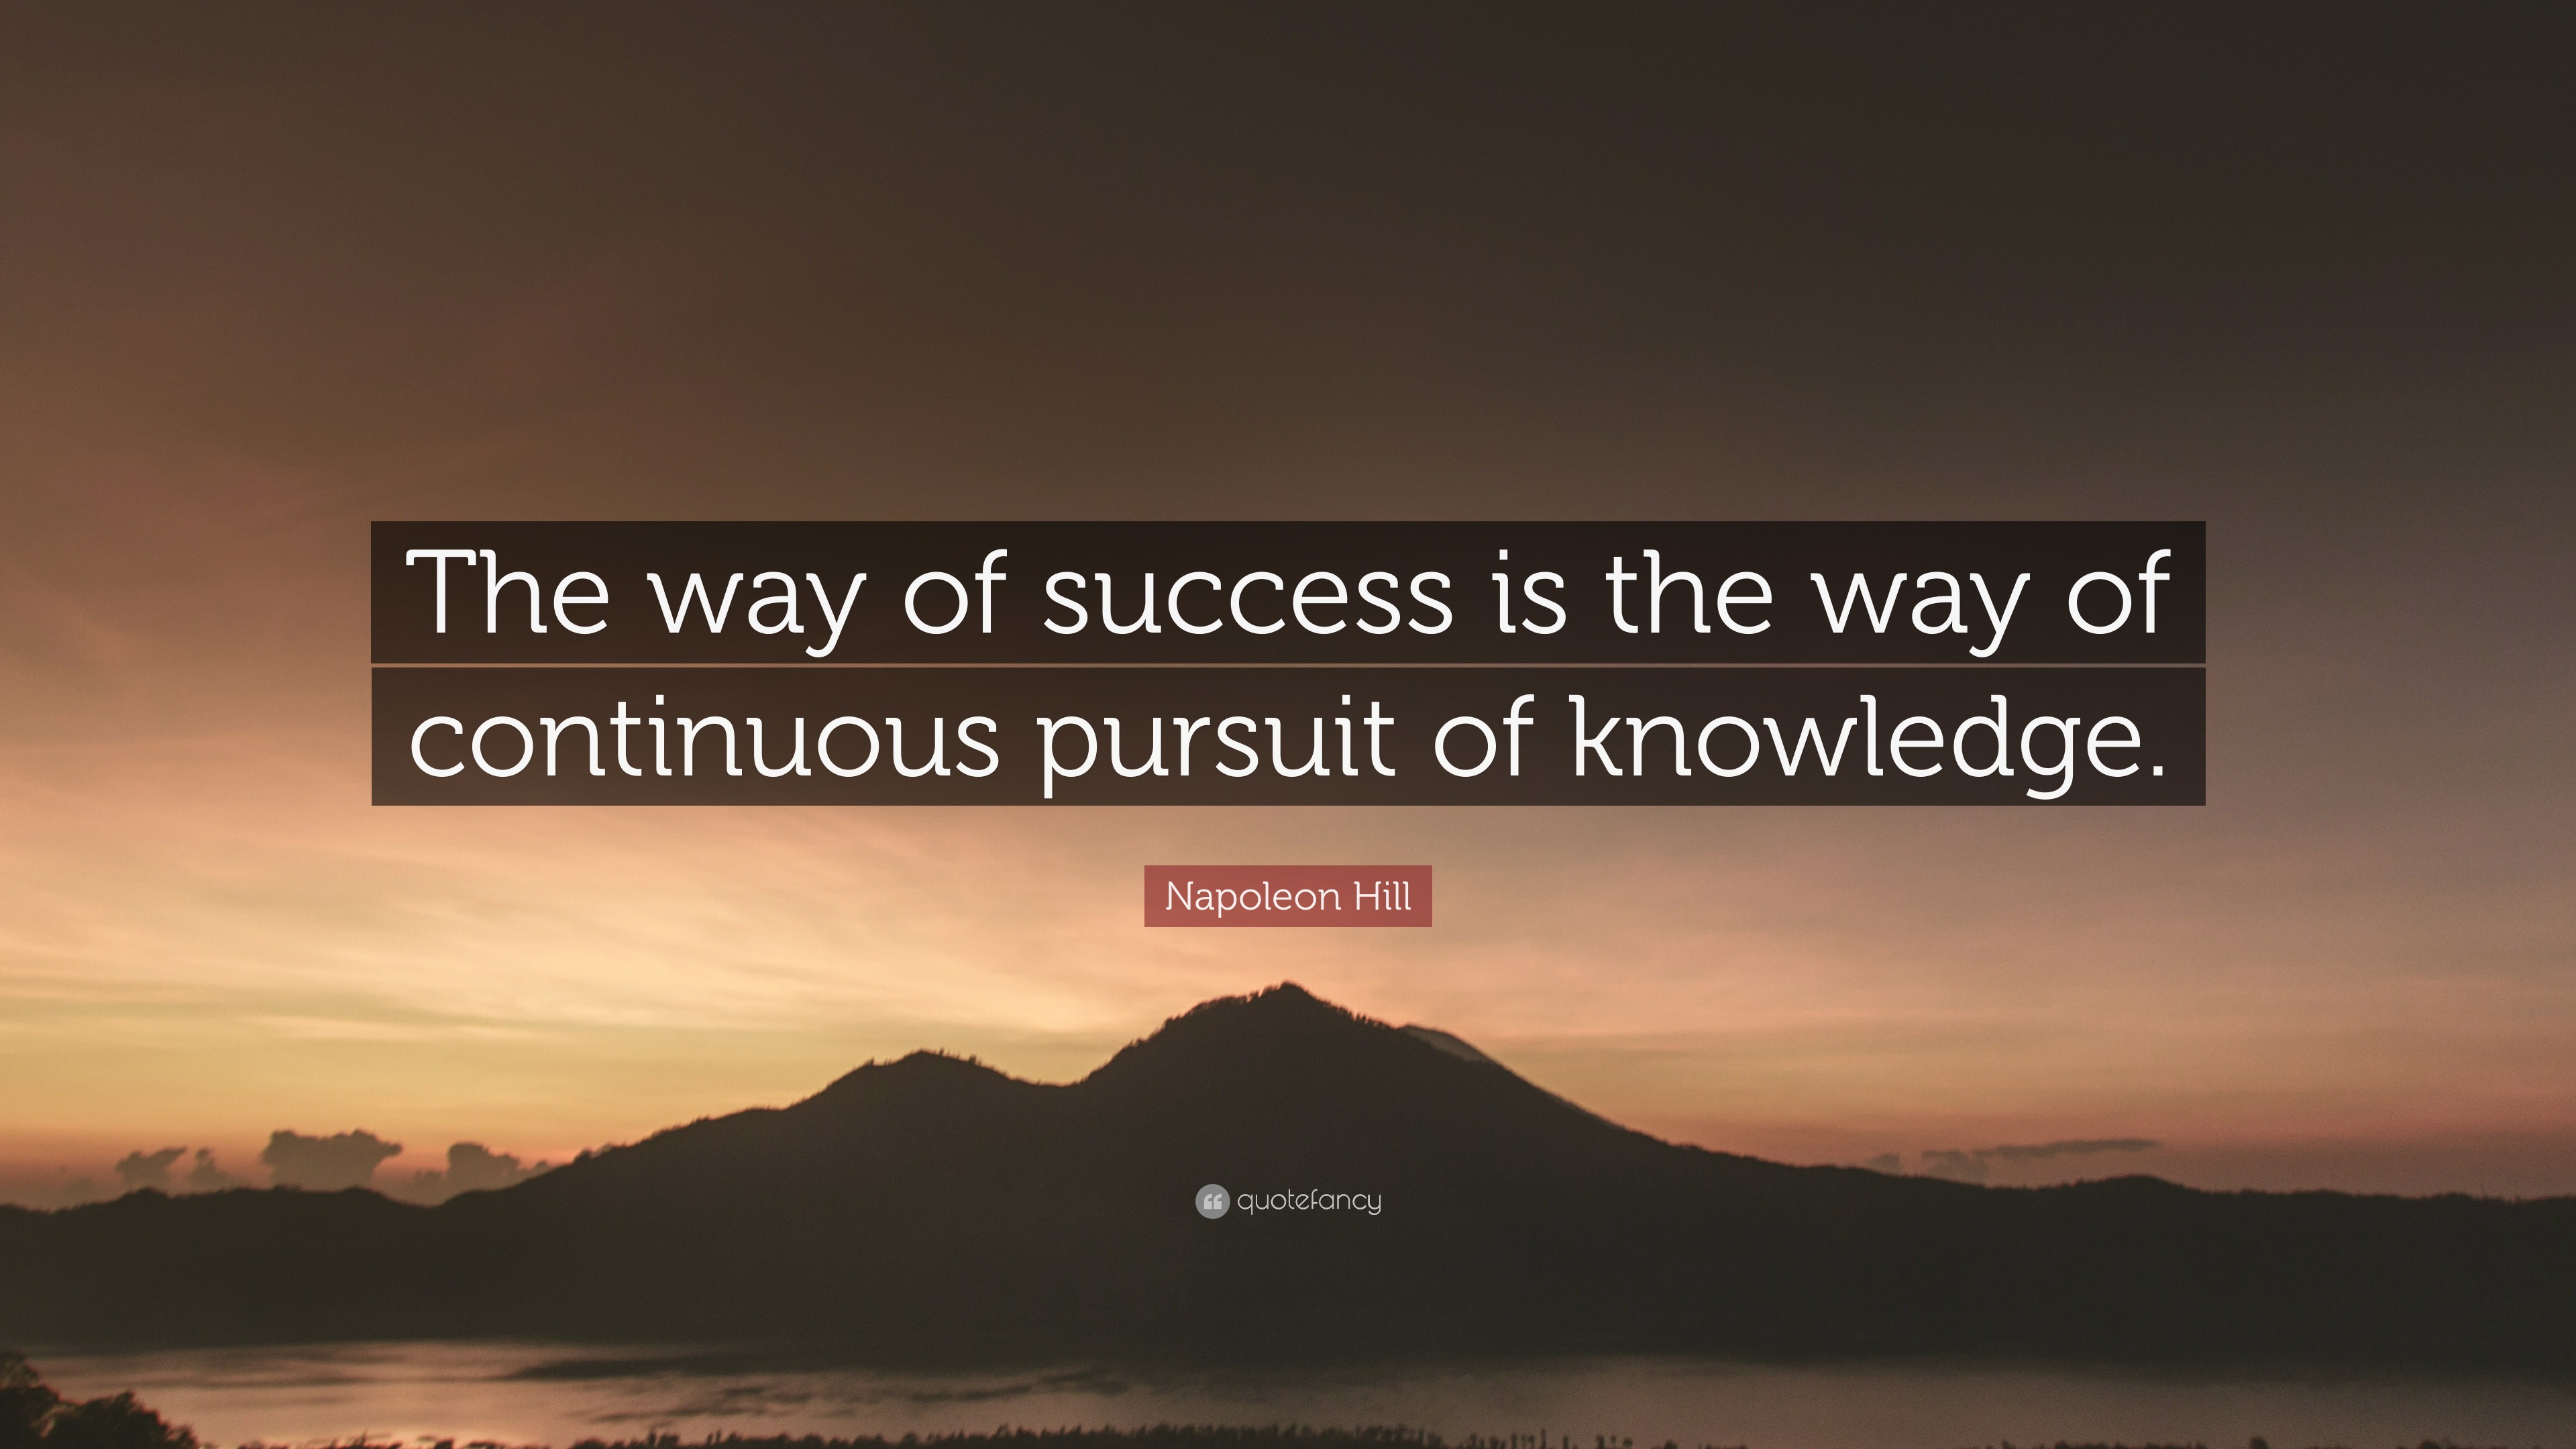 Napoleon Hill Quote: “The way of success is the way of continuous